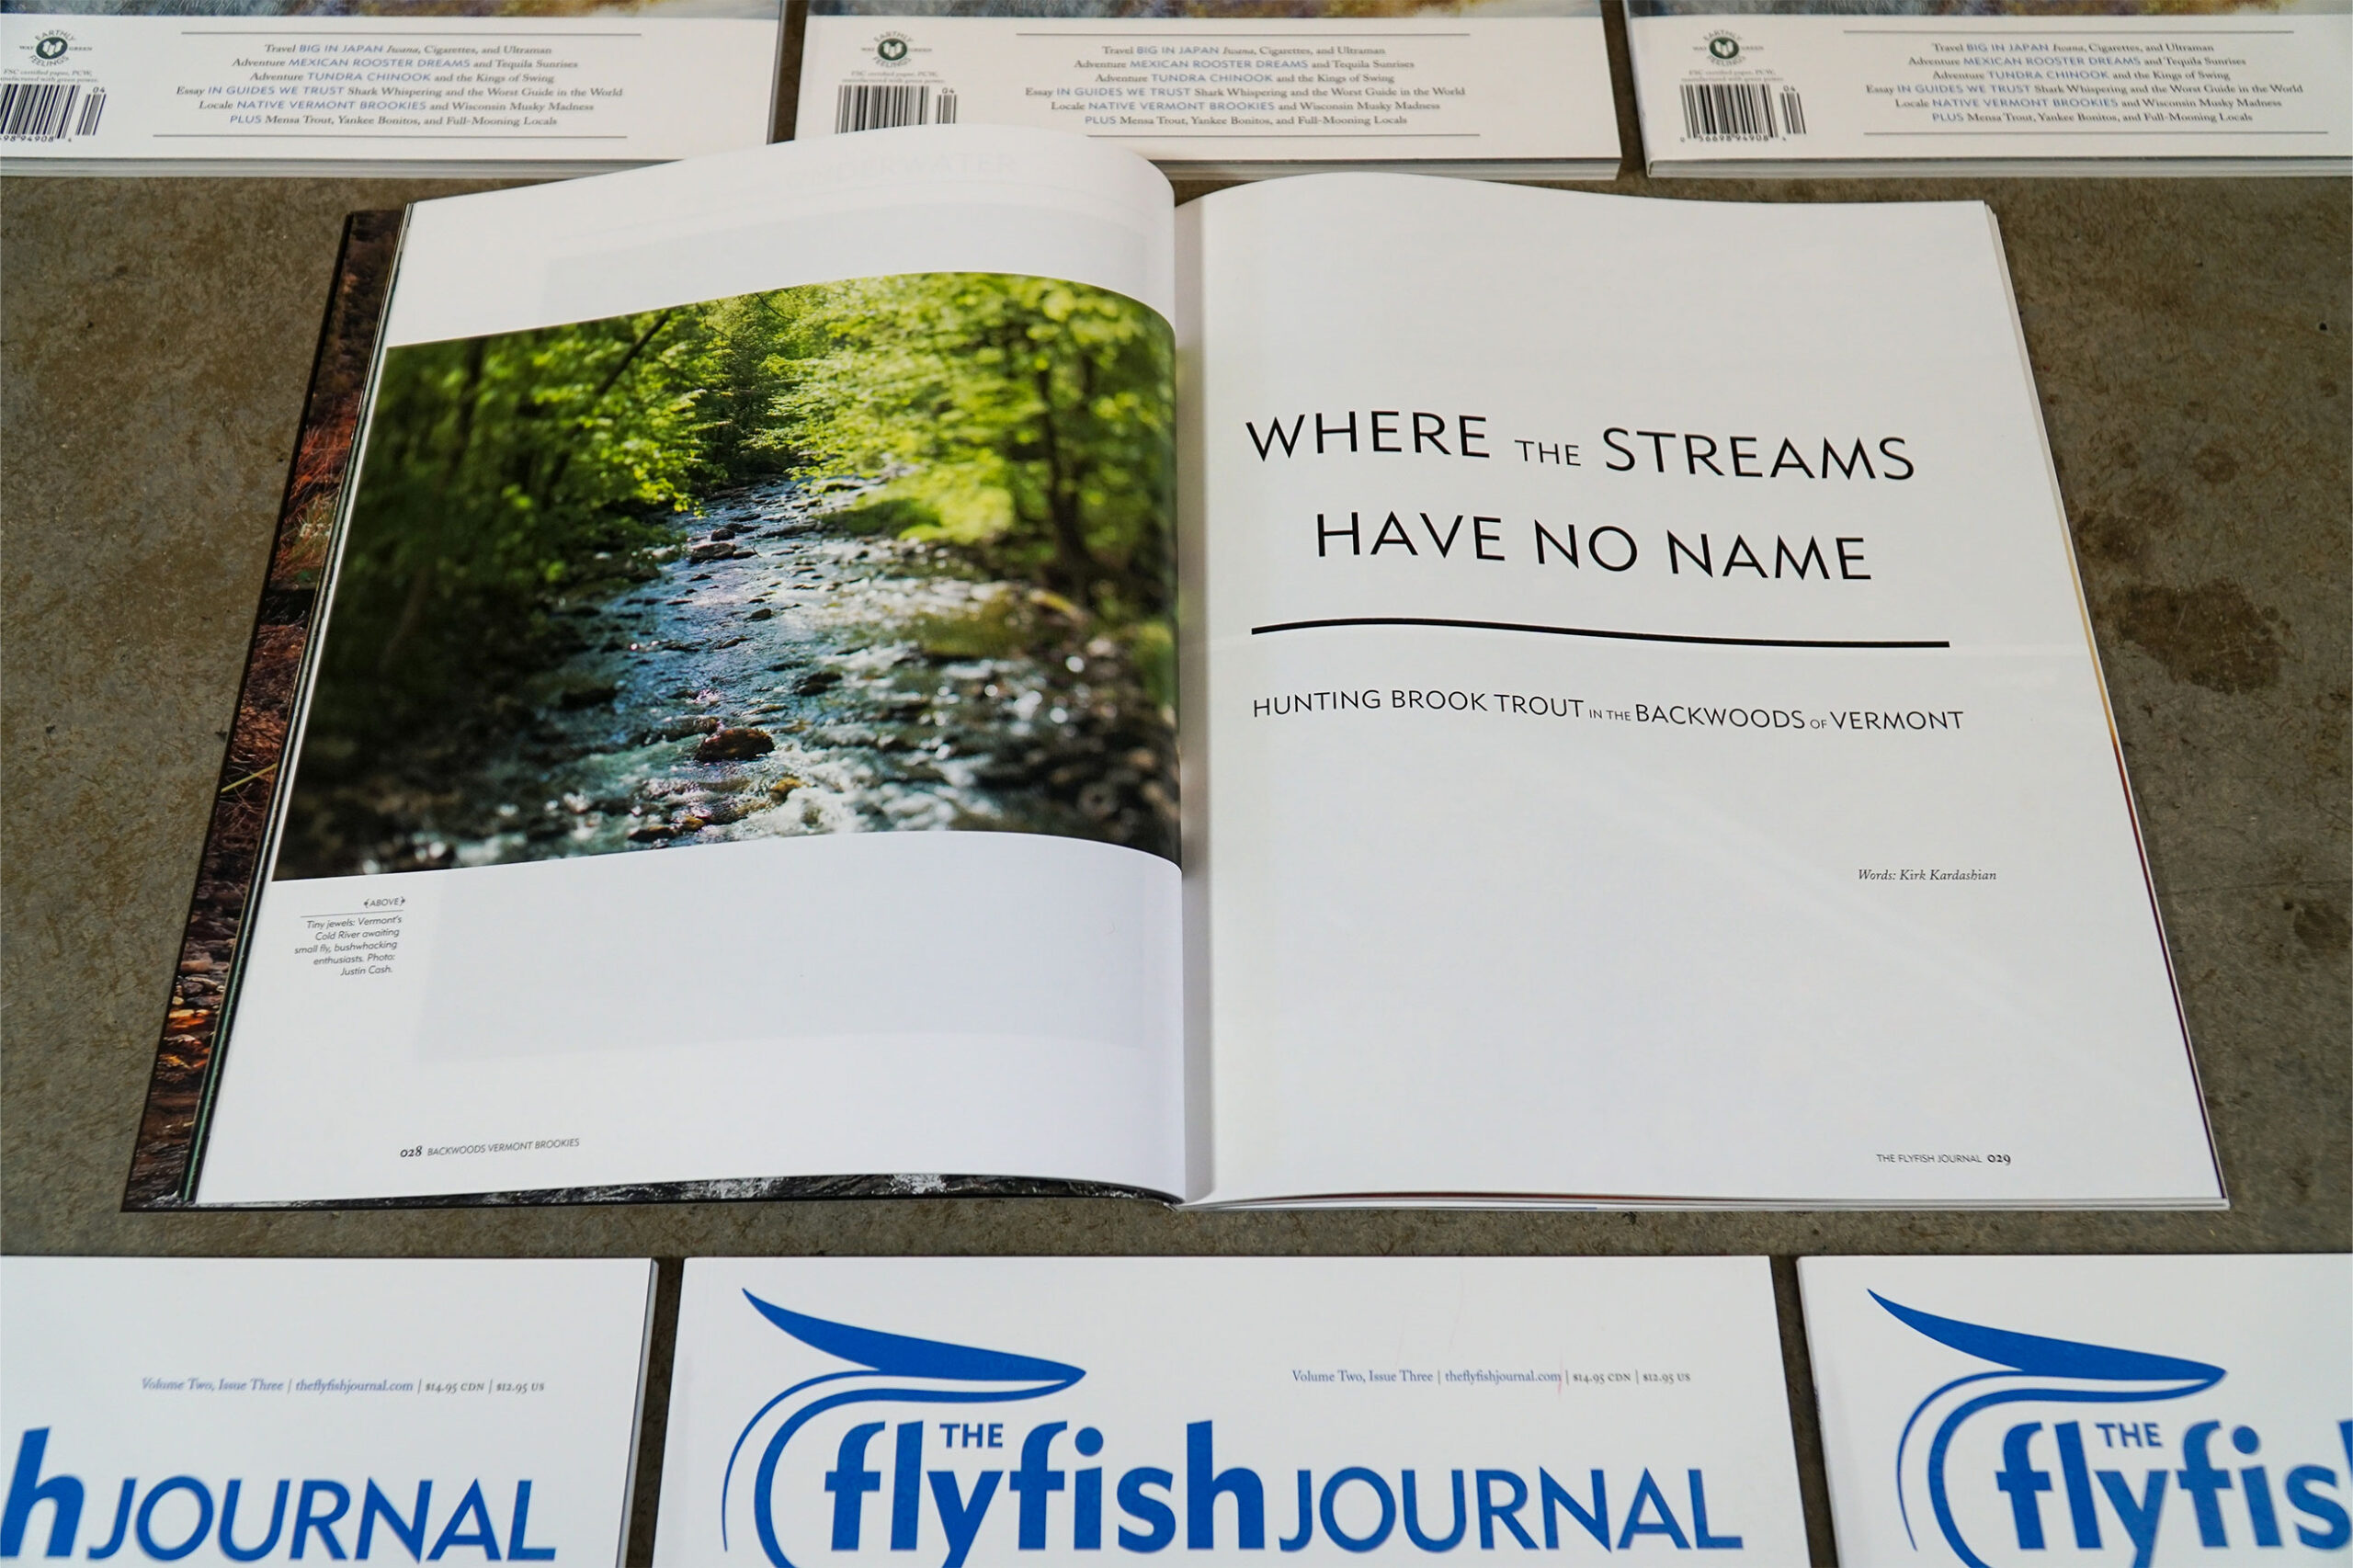 The Flyfish Journal Volume 2 Issue 3 Feature Where the Streams Have No Name